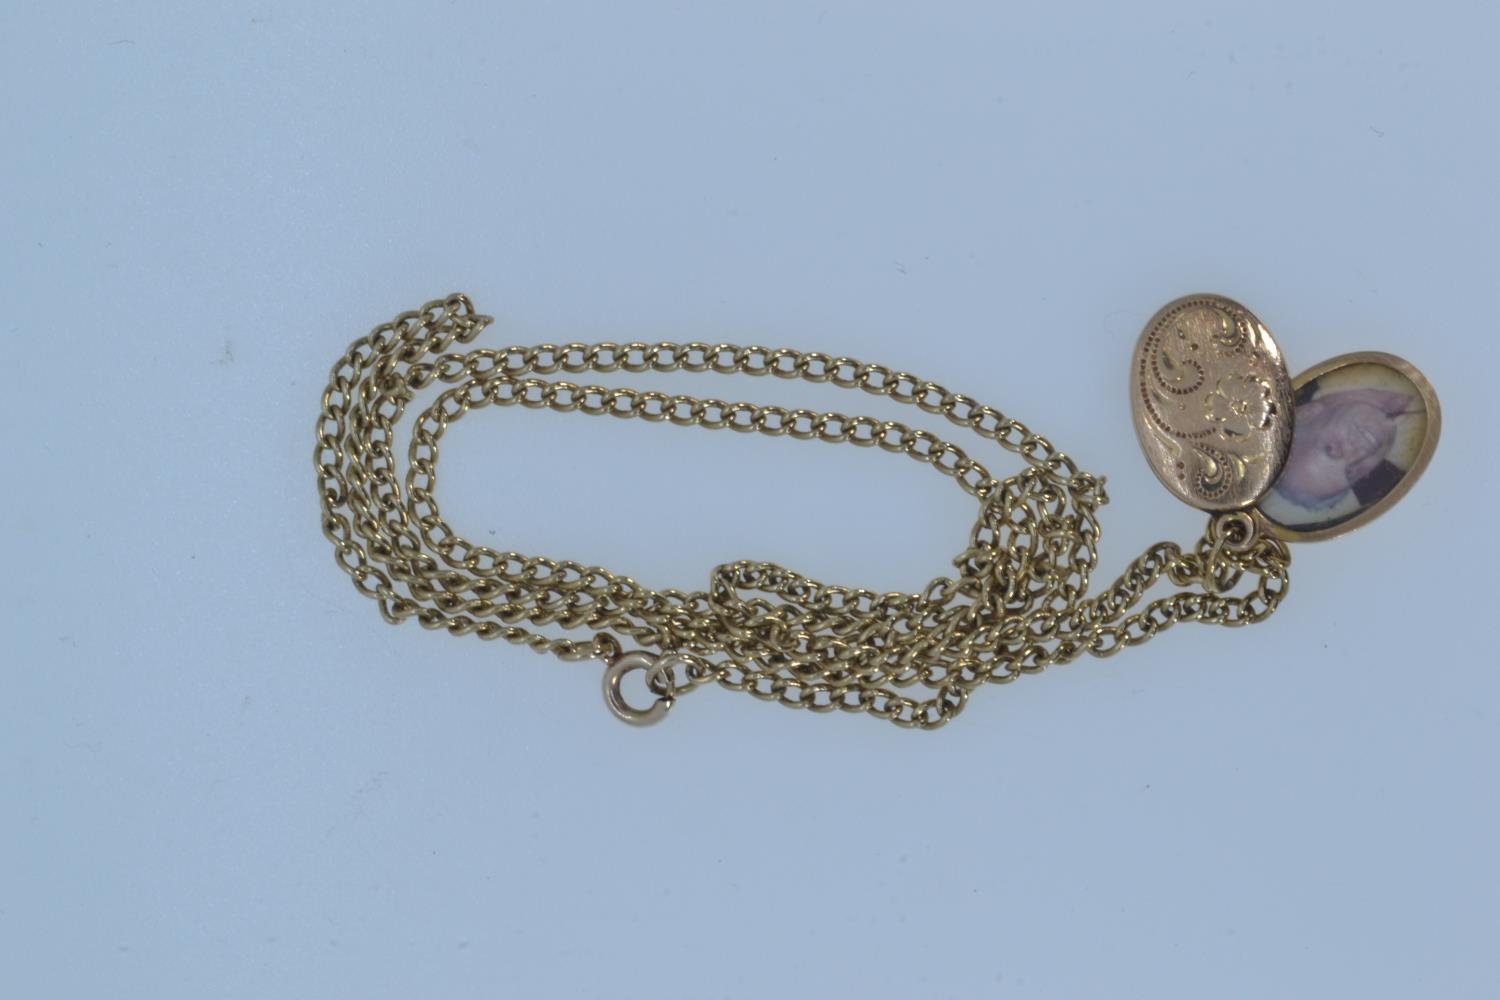 9ct gold locket & neck chain, locket length including link/bale 22mm, chain circumference 525mm, gro - Image 2 of 3